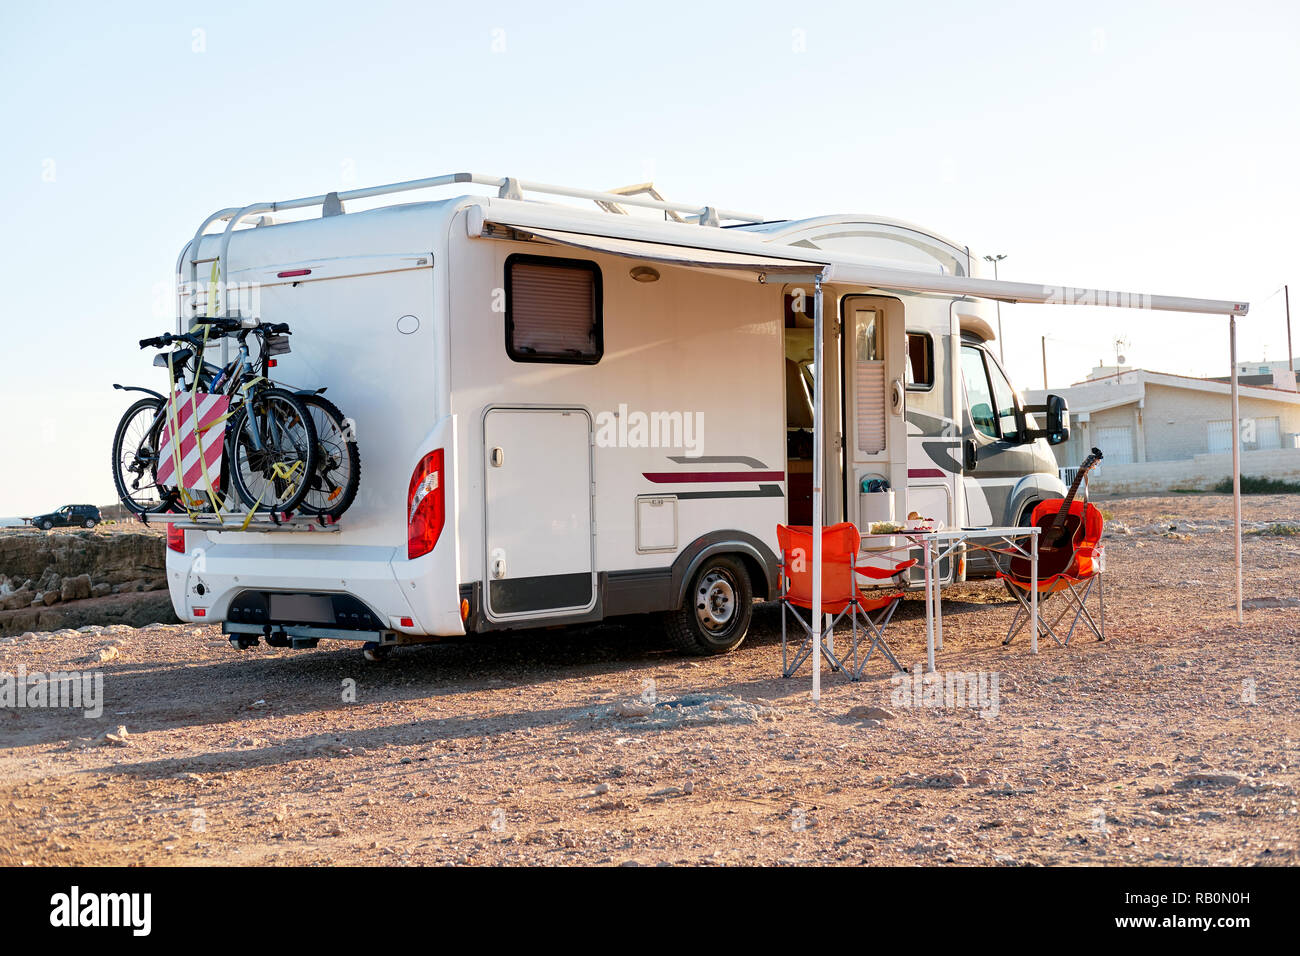 Empty folding chairs and table under canopy near recreational vehicle camper trailer. Adventure journey, active people traveling by motor home concept Stock Photo